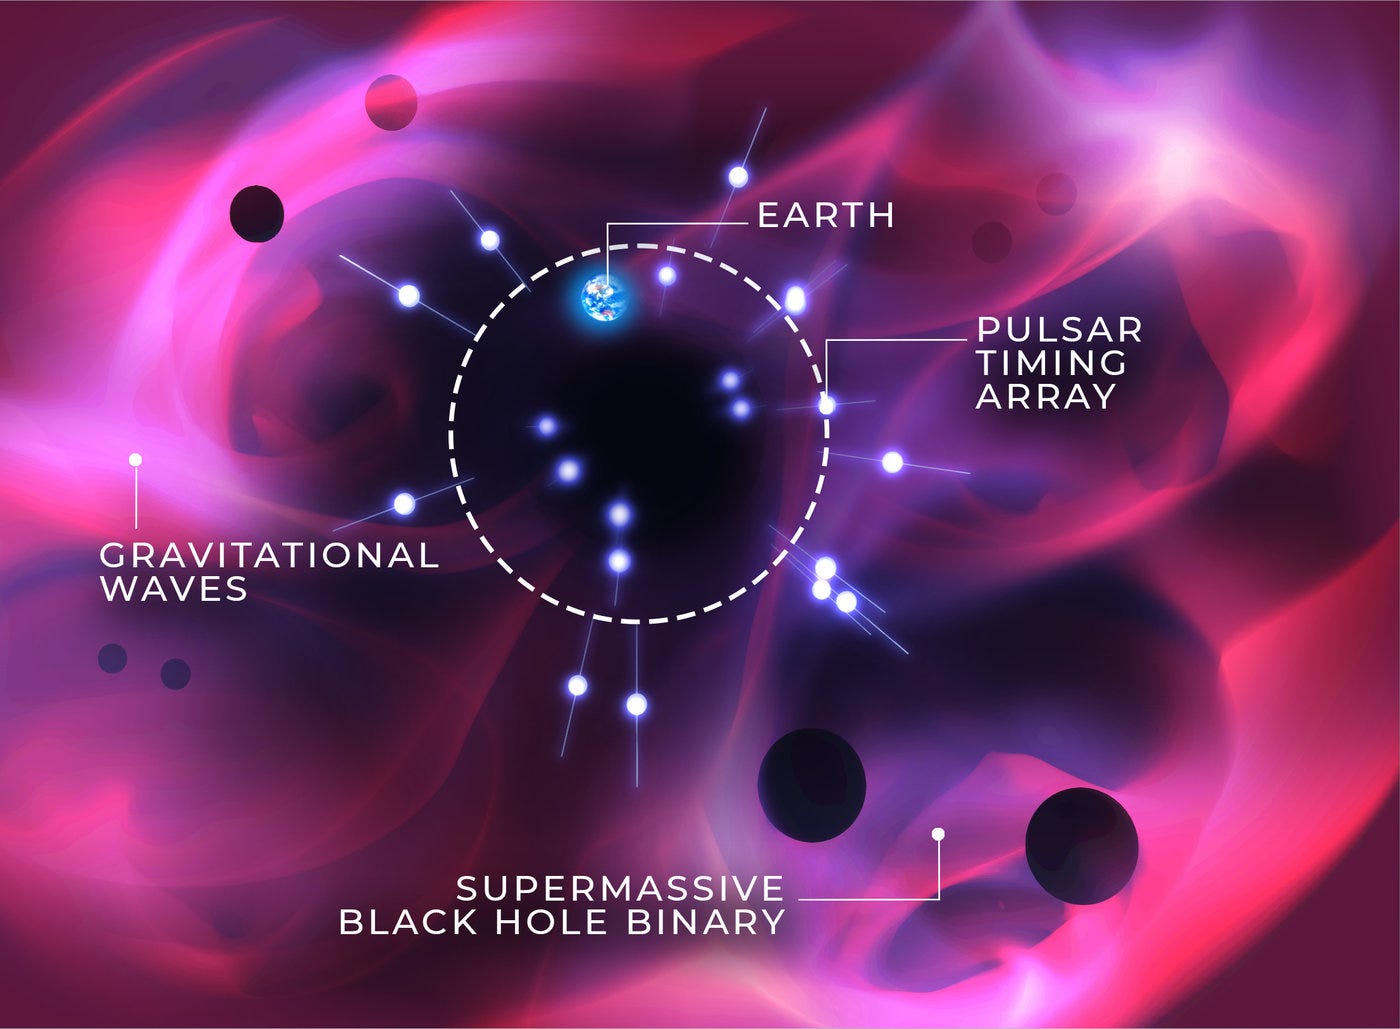 Fig. 1: Artist impression of the IPTA experiment – An array of pulsars around the Earth embedded in a gravitational wave background from supermassive black hole binaries. The signals from the pulsars measured with a network of global radio telescopes are affected by the gravitational waves and allow for the study of the origin of the background. The distances have been reduced for visual purposes, notably the supermassive black holes are much further away in reality. 